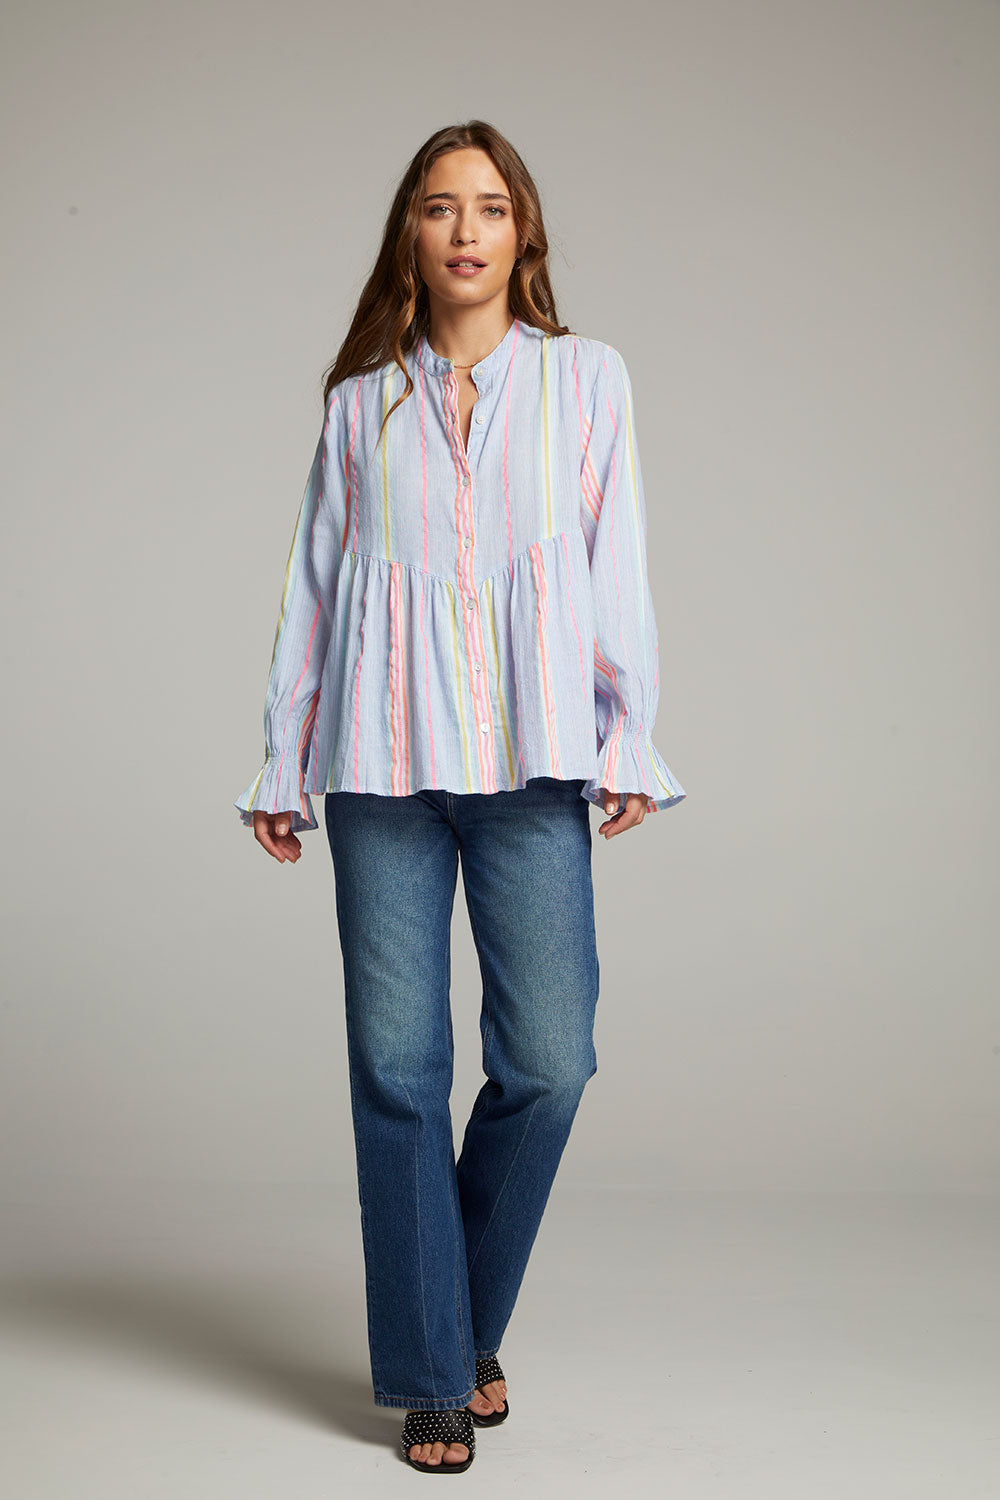 Dolphin South West Beach Stripe Button Down WOMENS chaserbrand